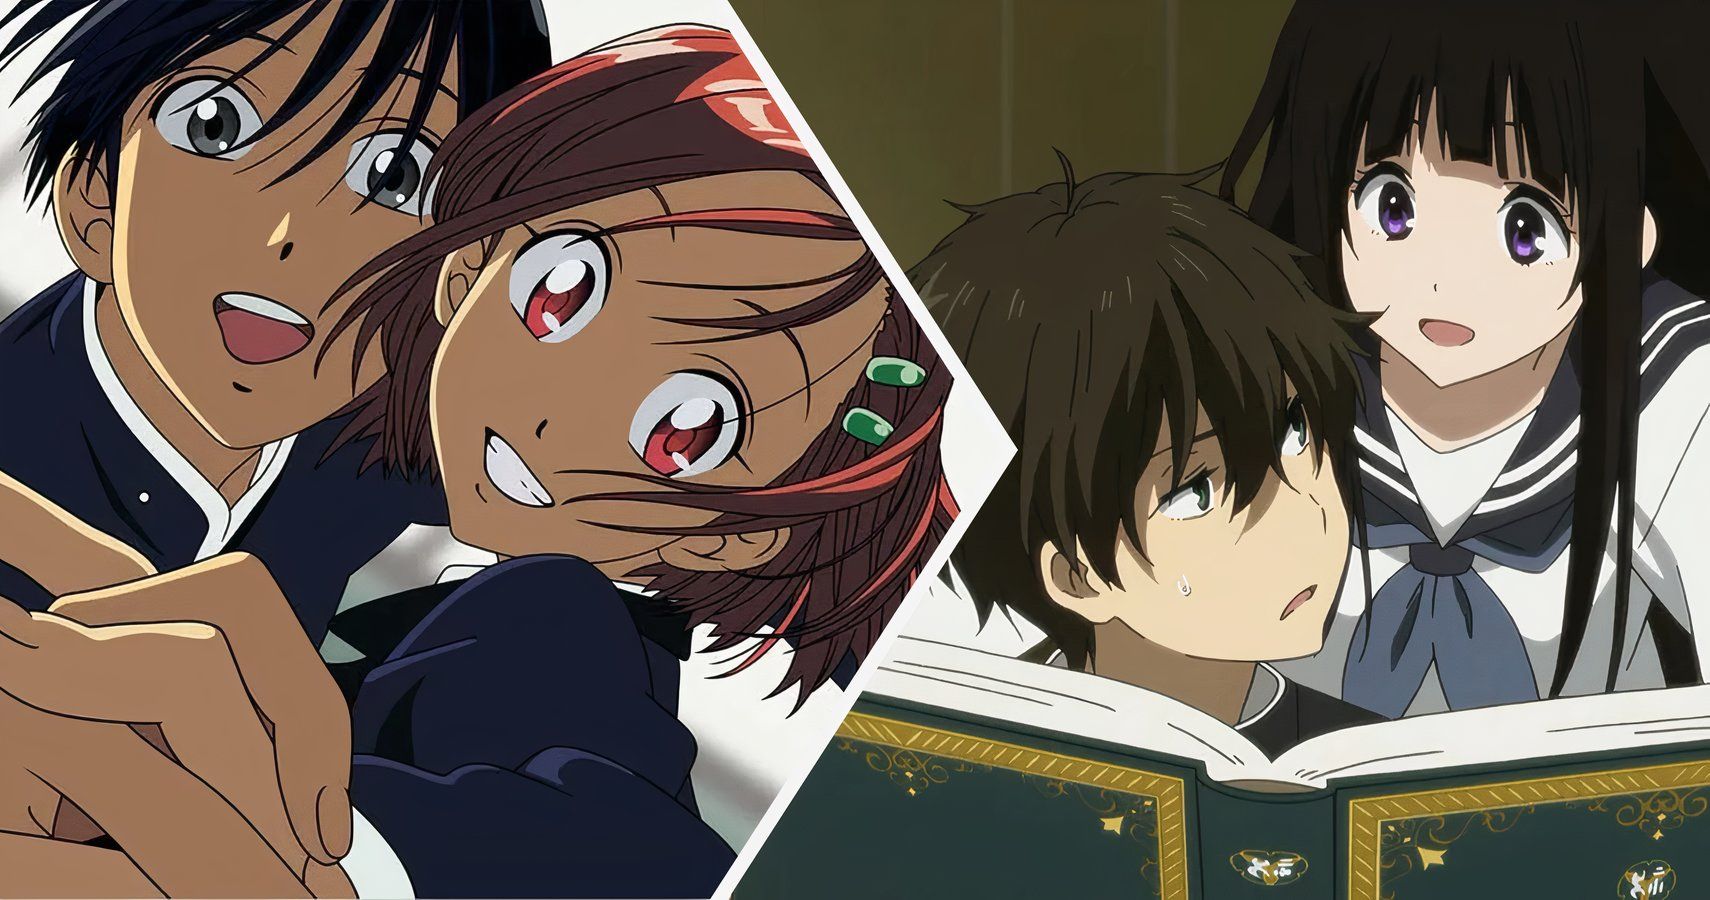 The main couples from Kare Kano and Hyouka